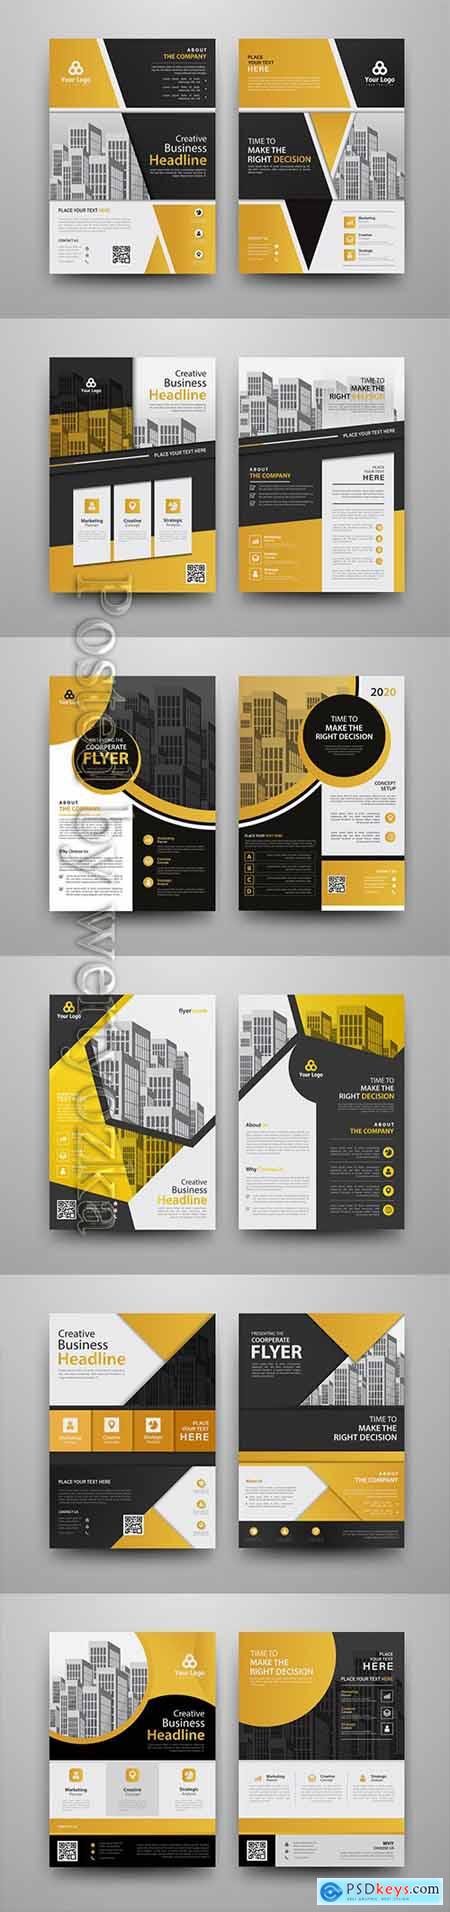 Business vector template for brochure, annual report, magazine229